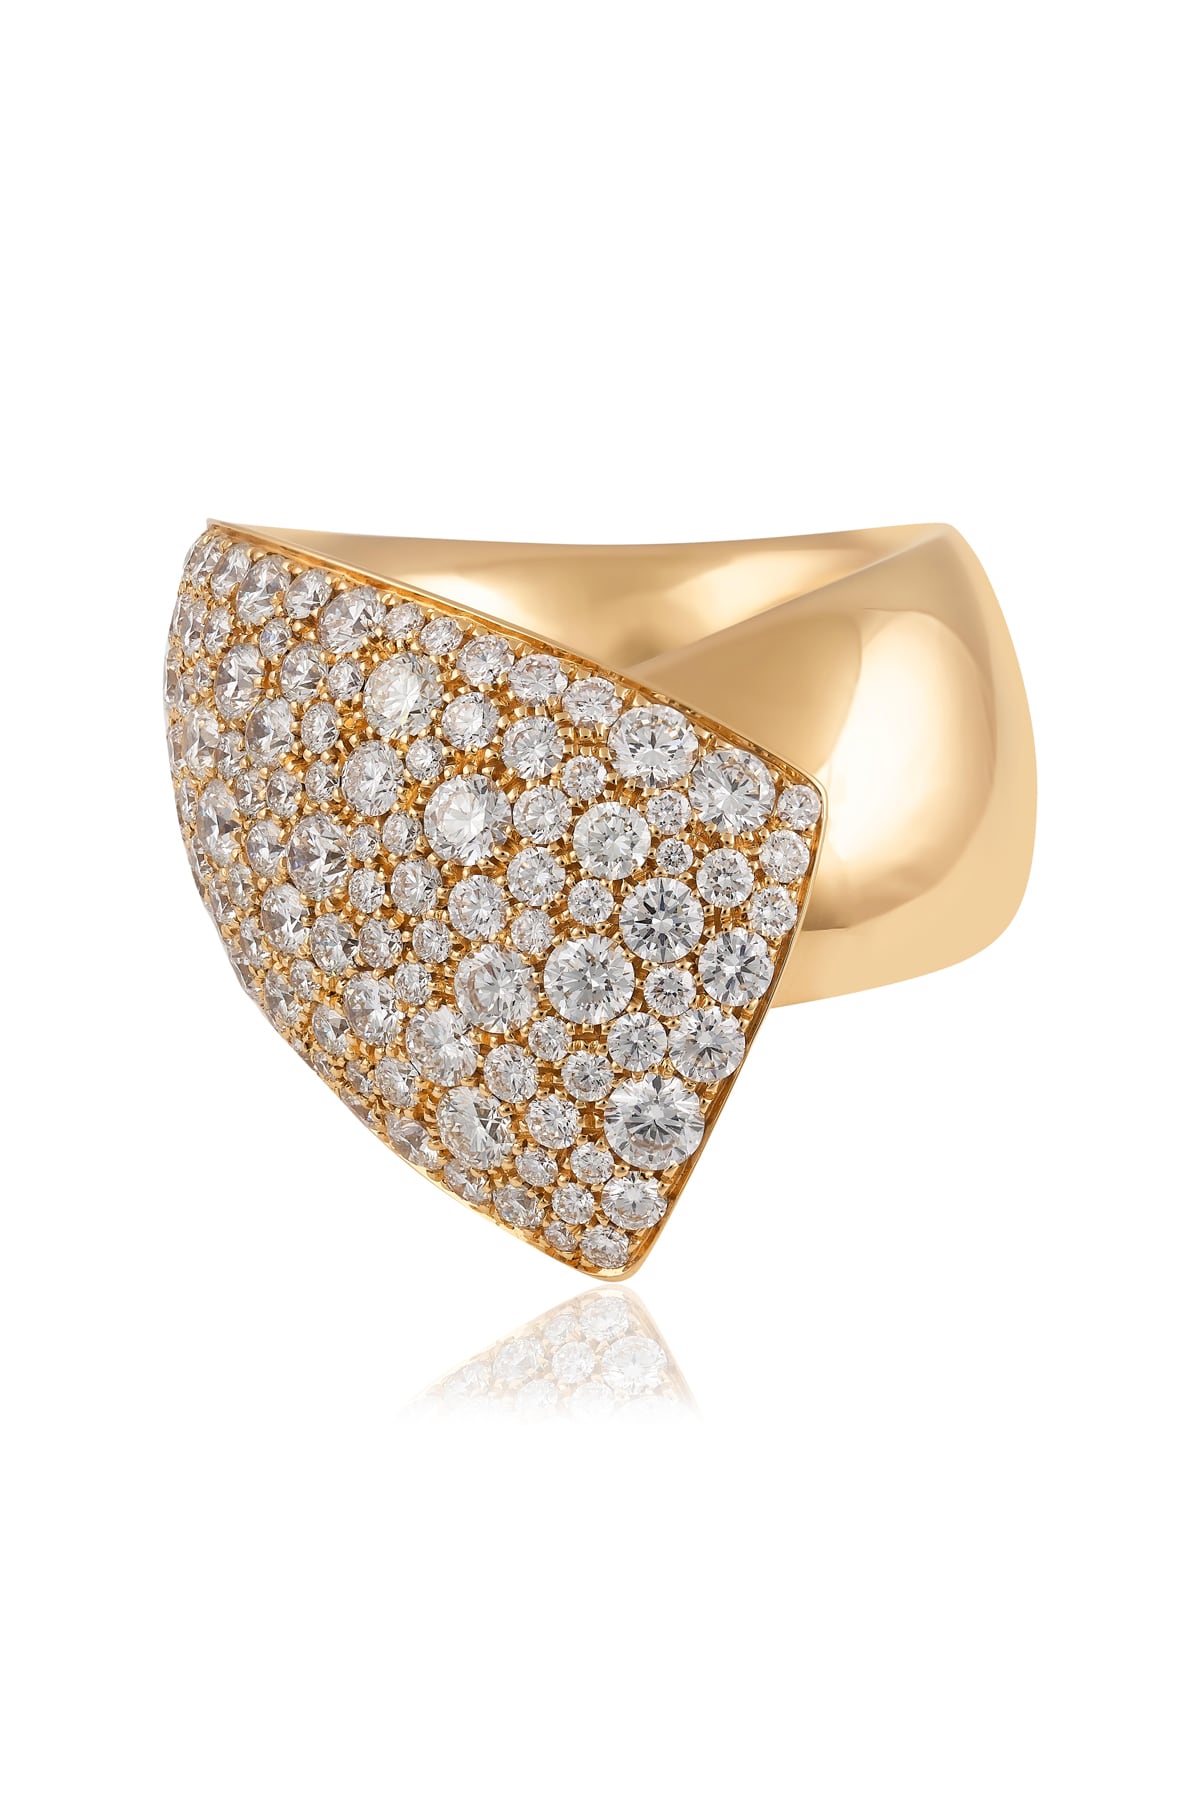 Large Diamond Pave Set Fancy Shaped Ring In 18 Carat Yellow Gold from LeGassick Jewellery.